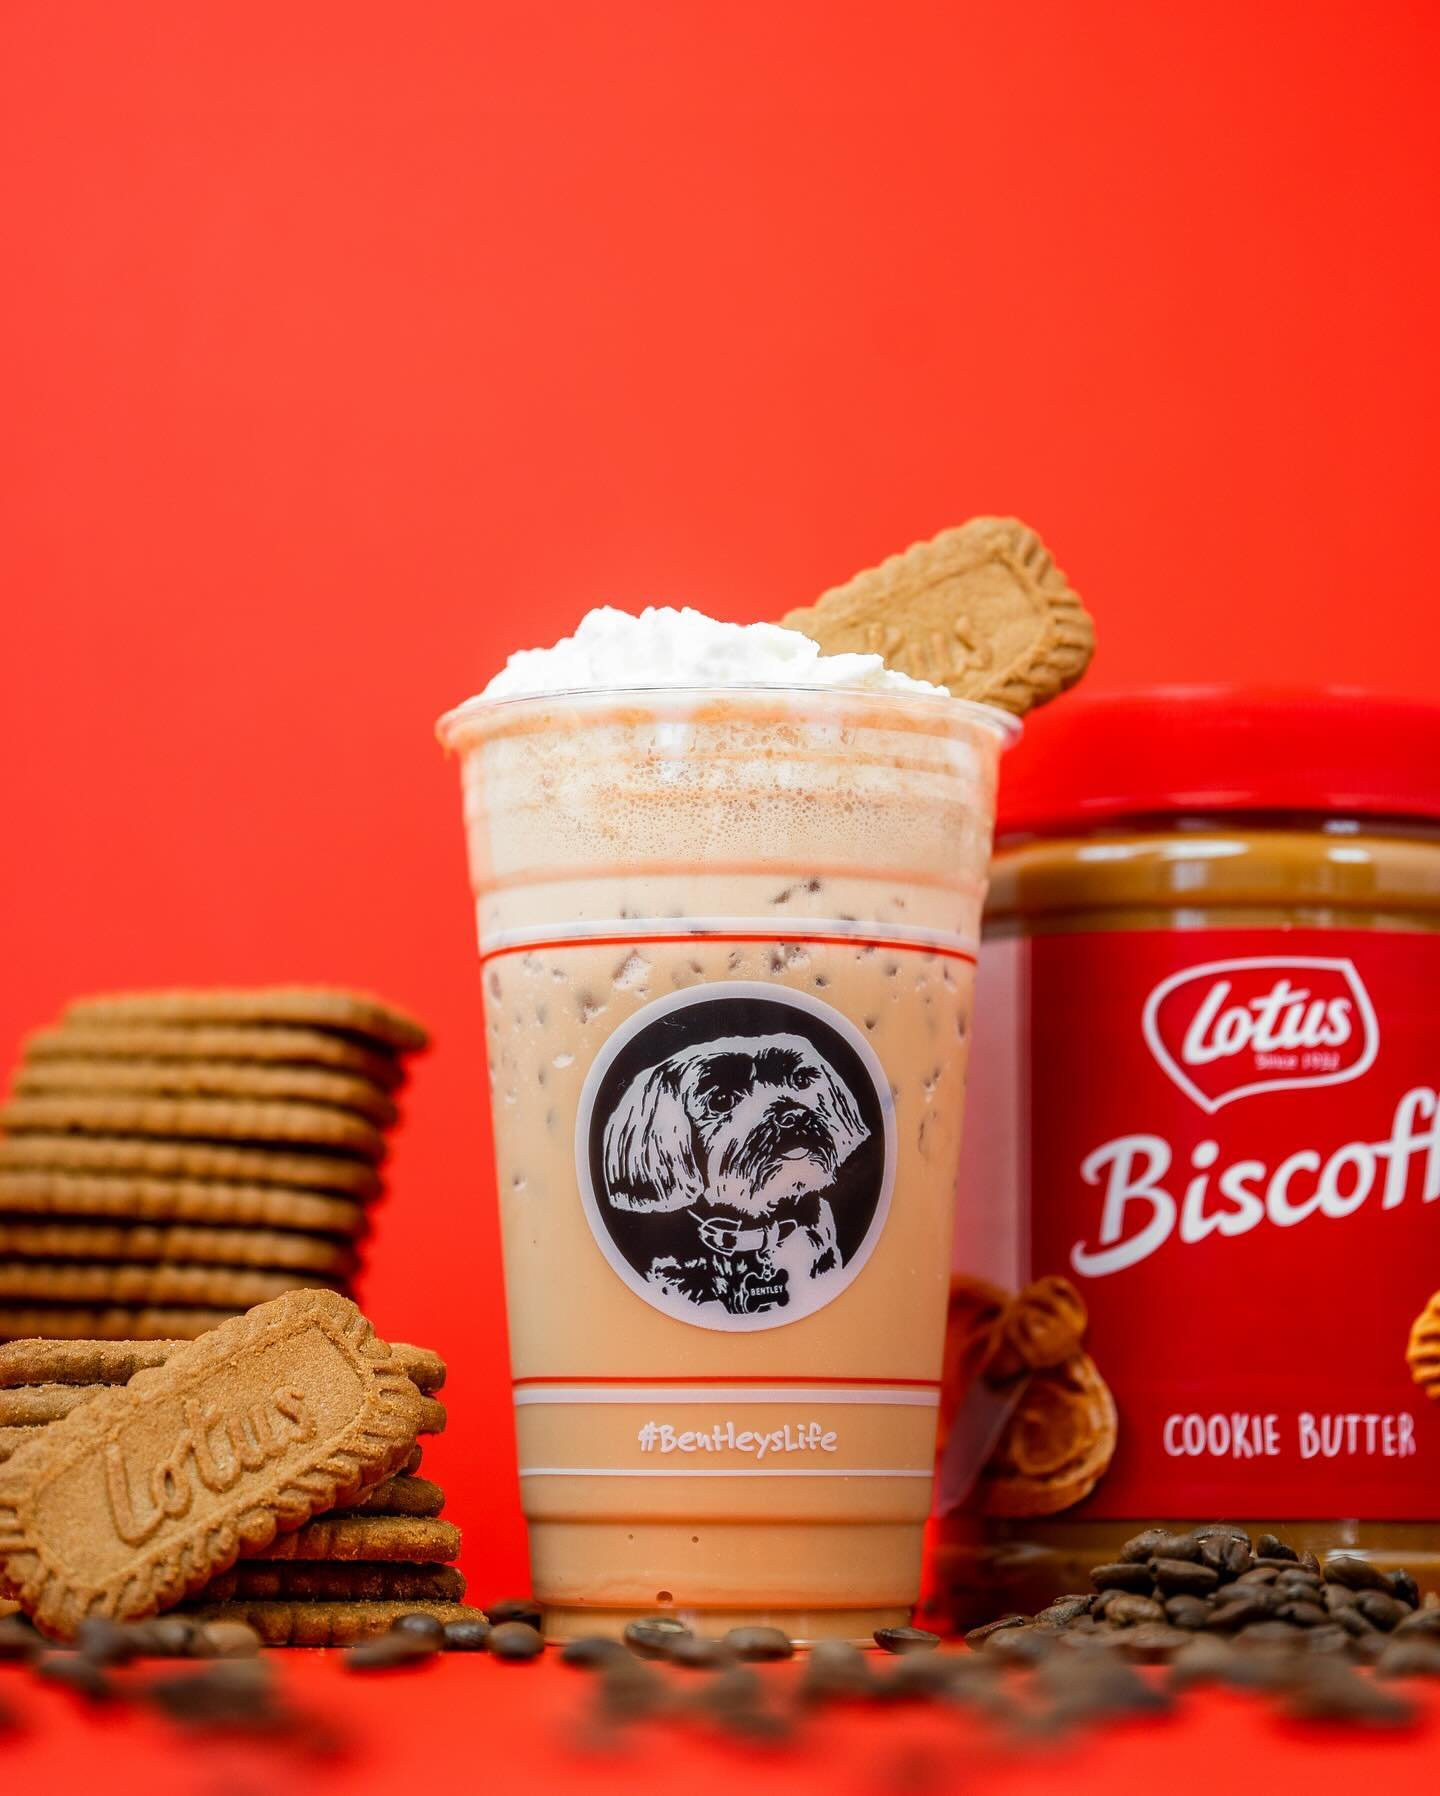 Cookie Butter Nitro Cold Brew!!! 

Nitrous infused Guatemalan cold brew infused with rich and creamy cookie butter. Topped with our house-made whipped cream &amp; a biscoff cookie. It&rsquo;s delicious. 🤤

One of our featured specials for April, but